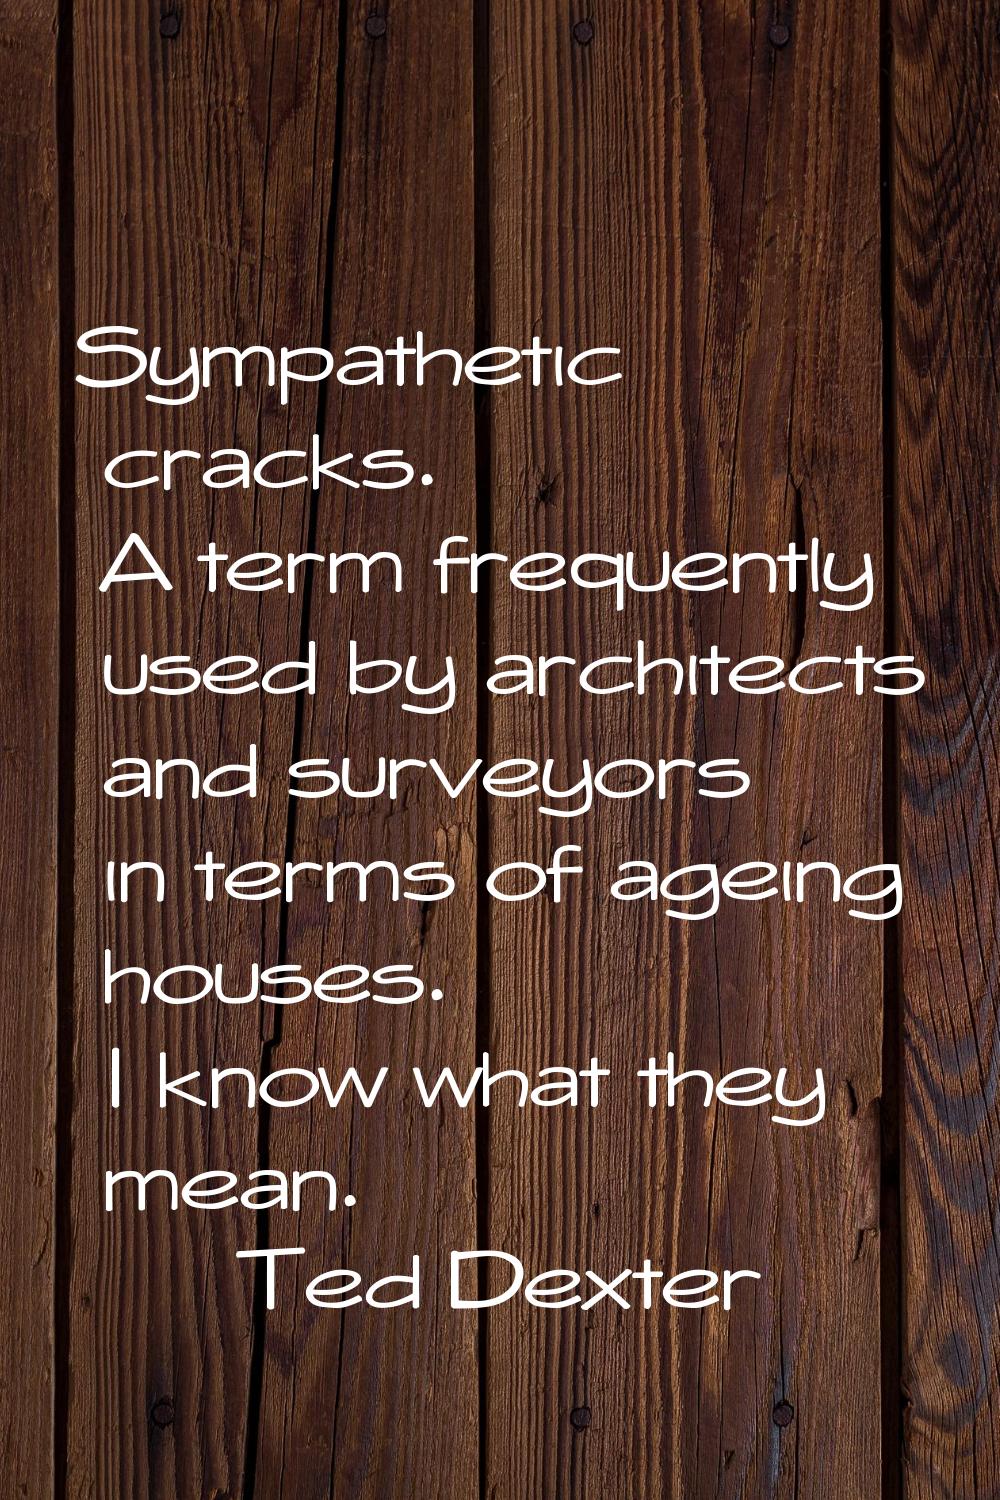 Sympathetic cracks. A term frequently used by architects and surveyors in terms of ageing houses. I